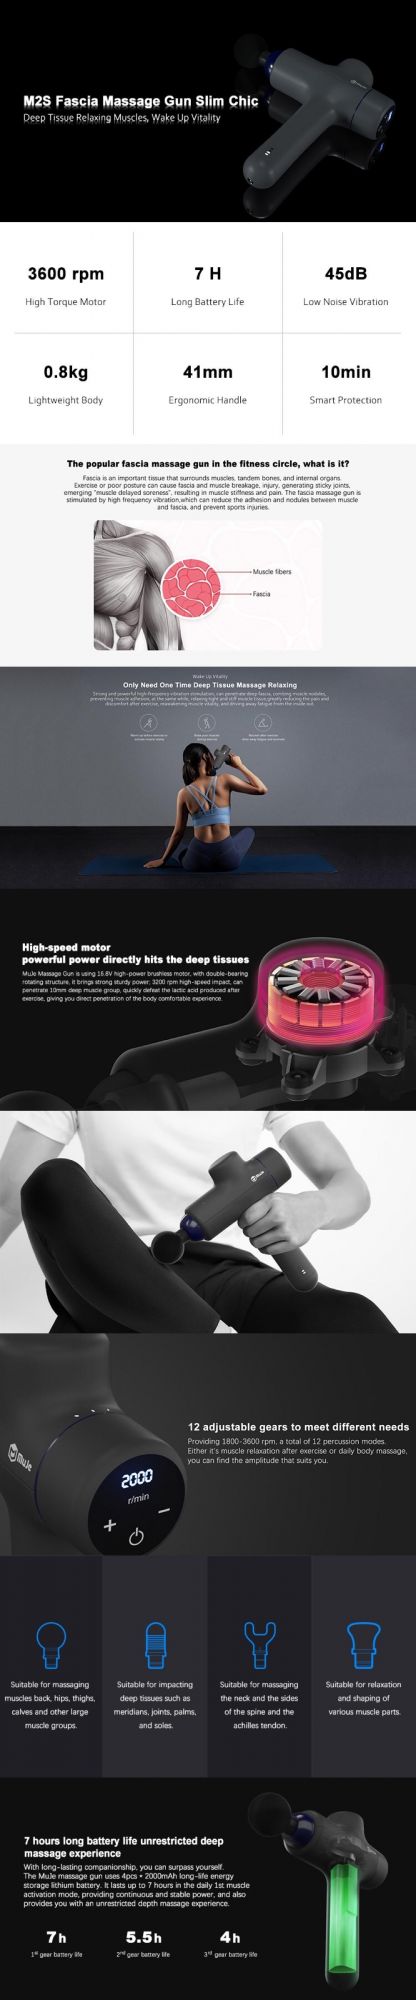 Muje Vibration Handheld Muscle Massage Gun for Relaxation in Gym